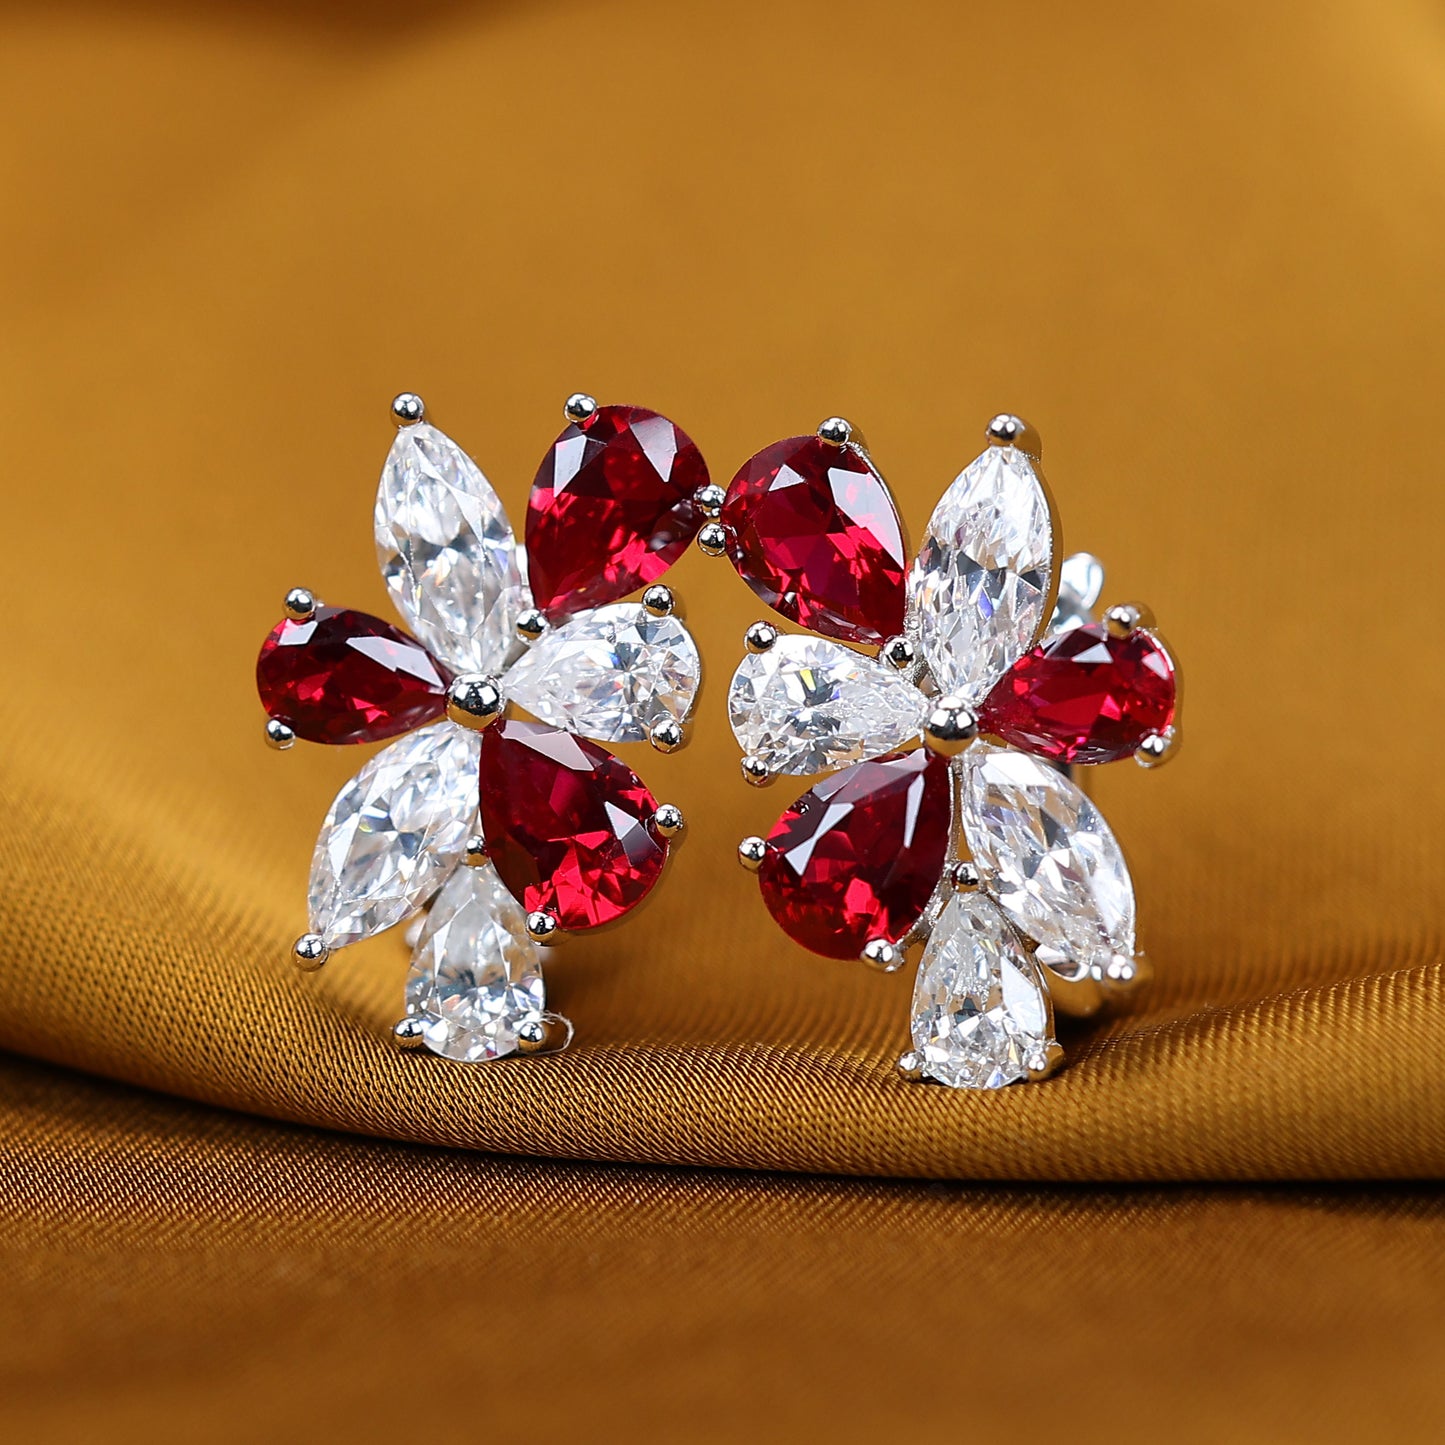 Micro-setting Ruby and diamond color Lab created stones waterdrops petal earrings, sterling silver